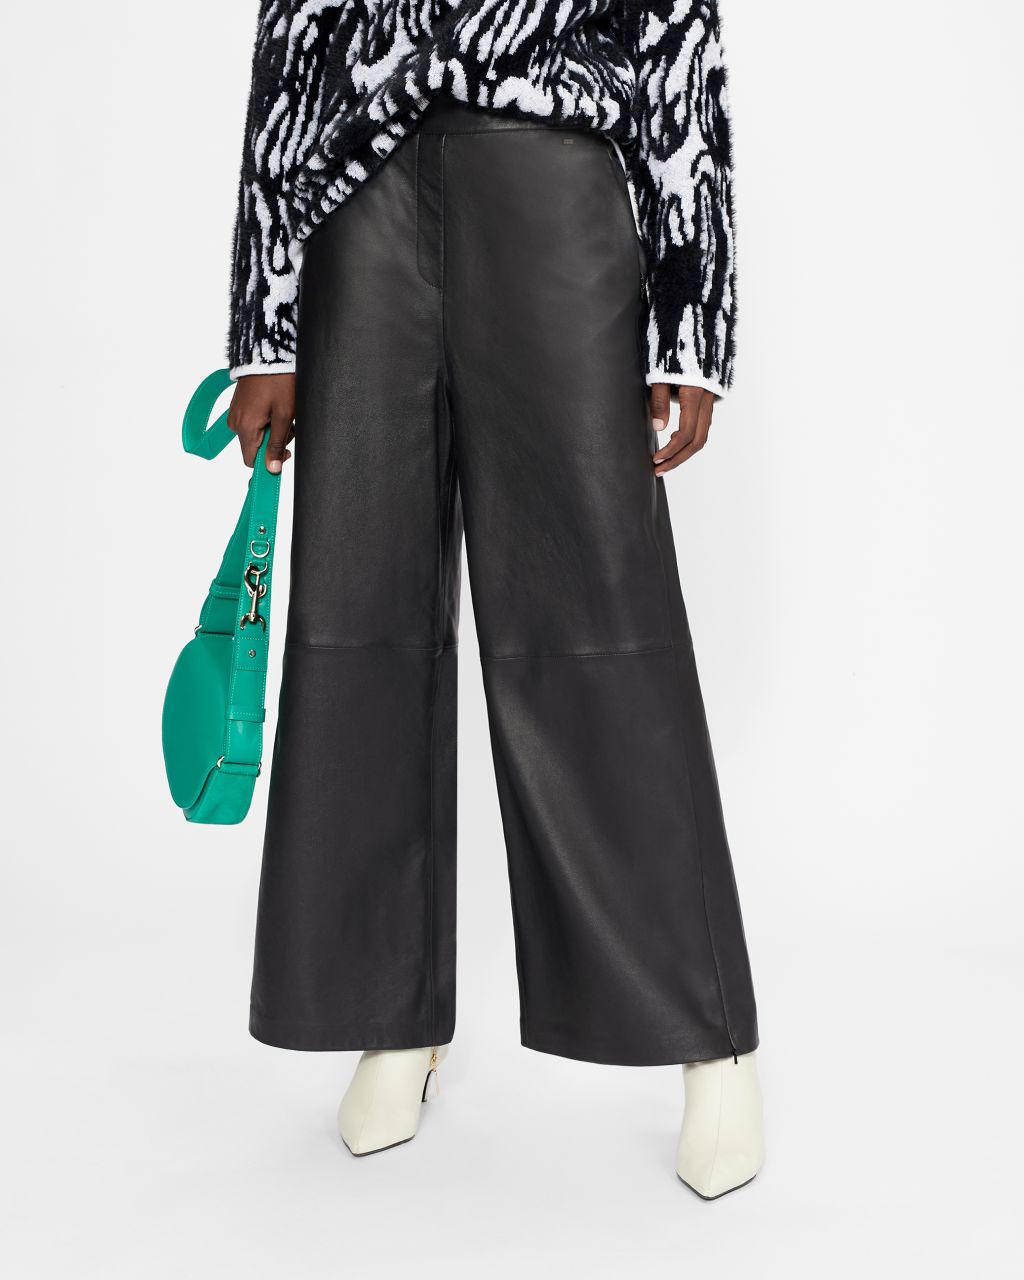 Wide Leg Leather Trousers